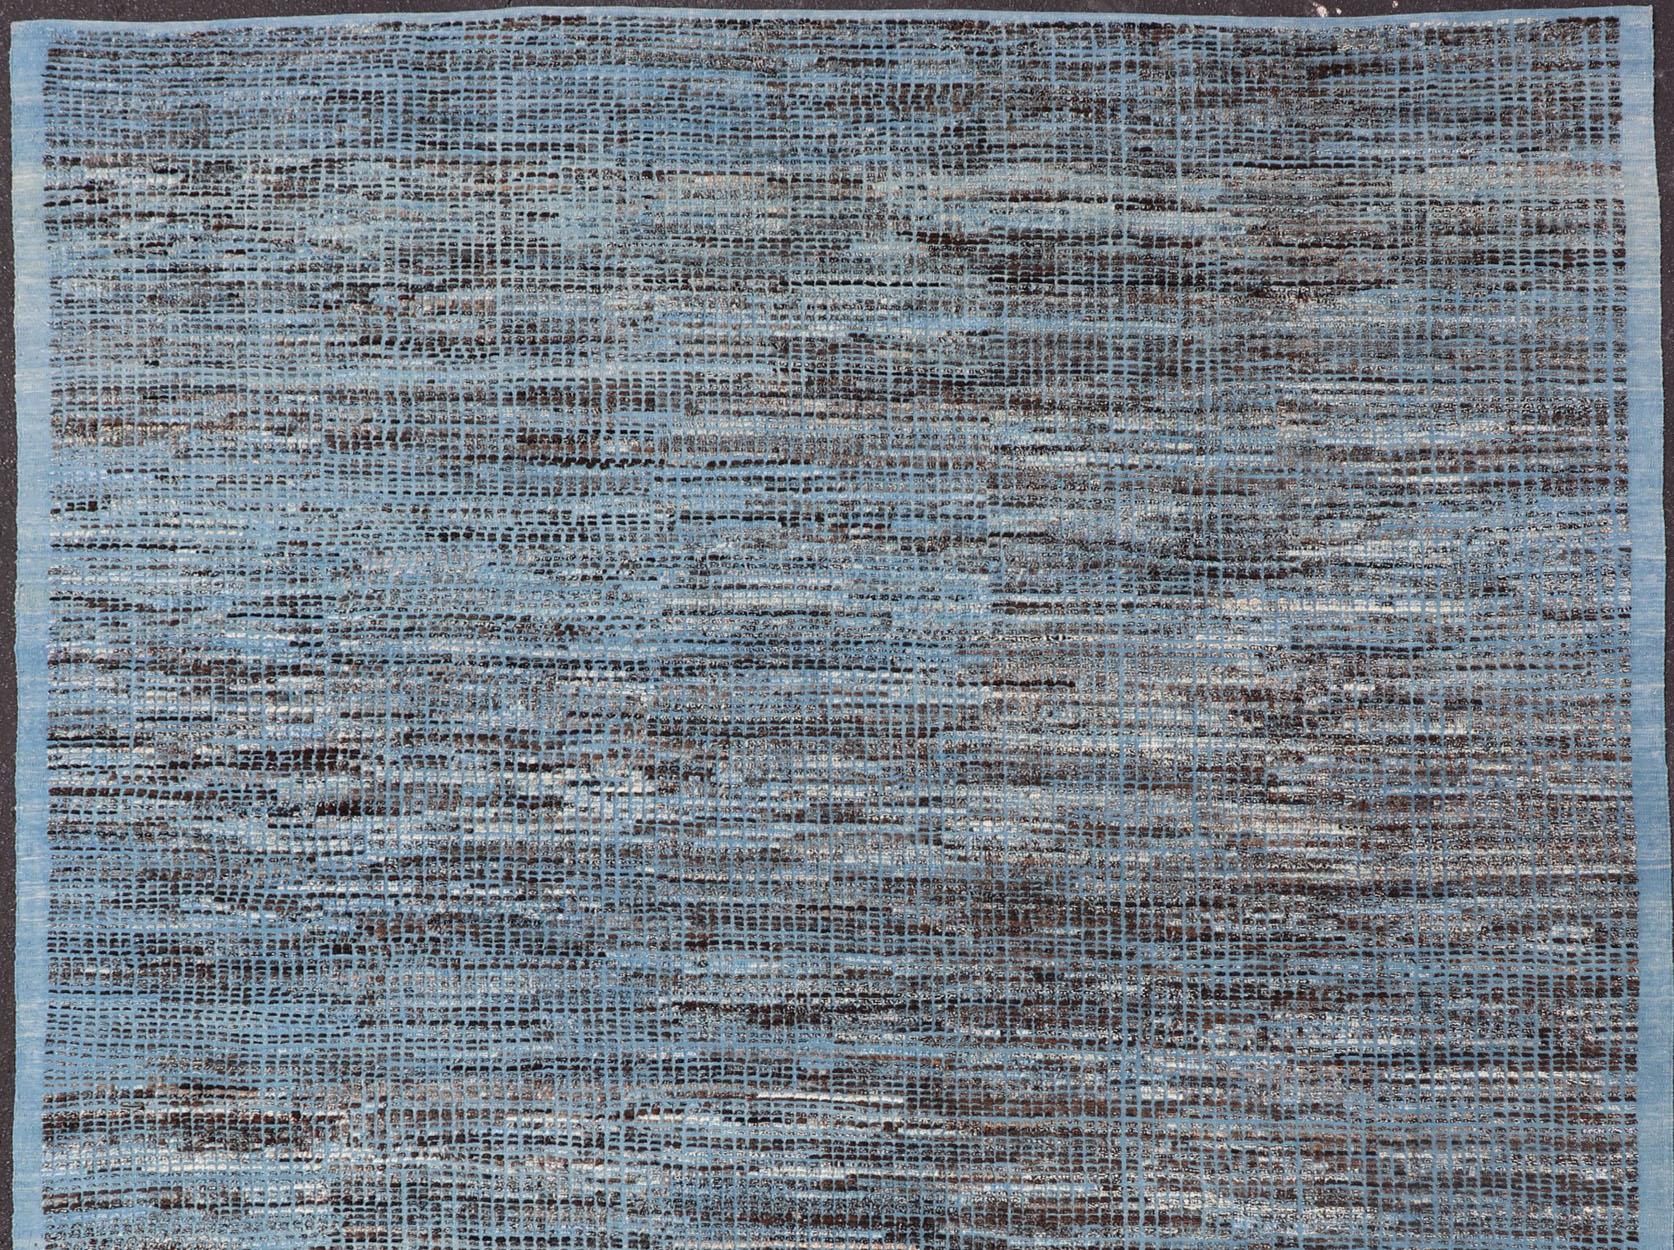 Afghanistan made rug in Various blues and charcoal colors in hi-low texture and free-flowing tribal design, Keivan Woven Arts / rug AFG-30452, country of origin / type: Afghanistan / Modern Casual

The modern casual design of this rug makes it